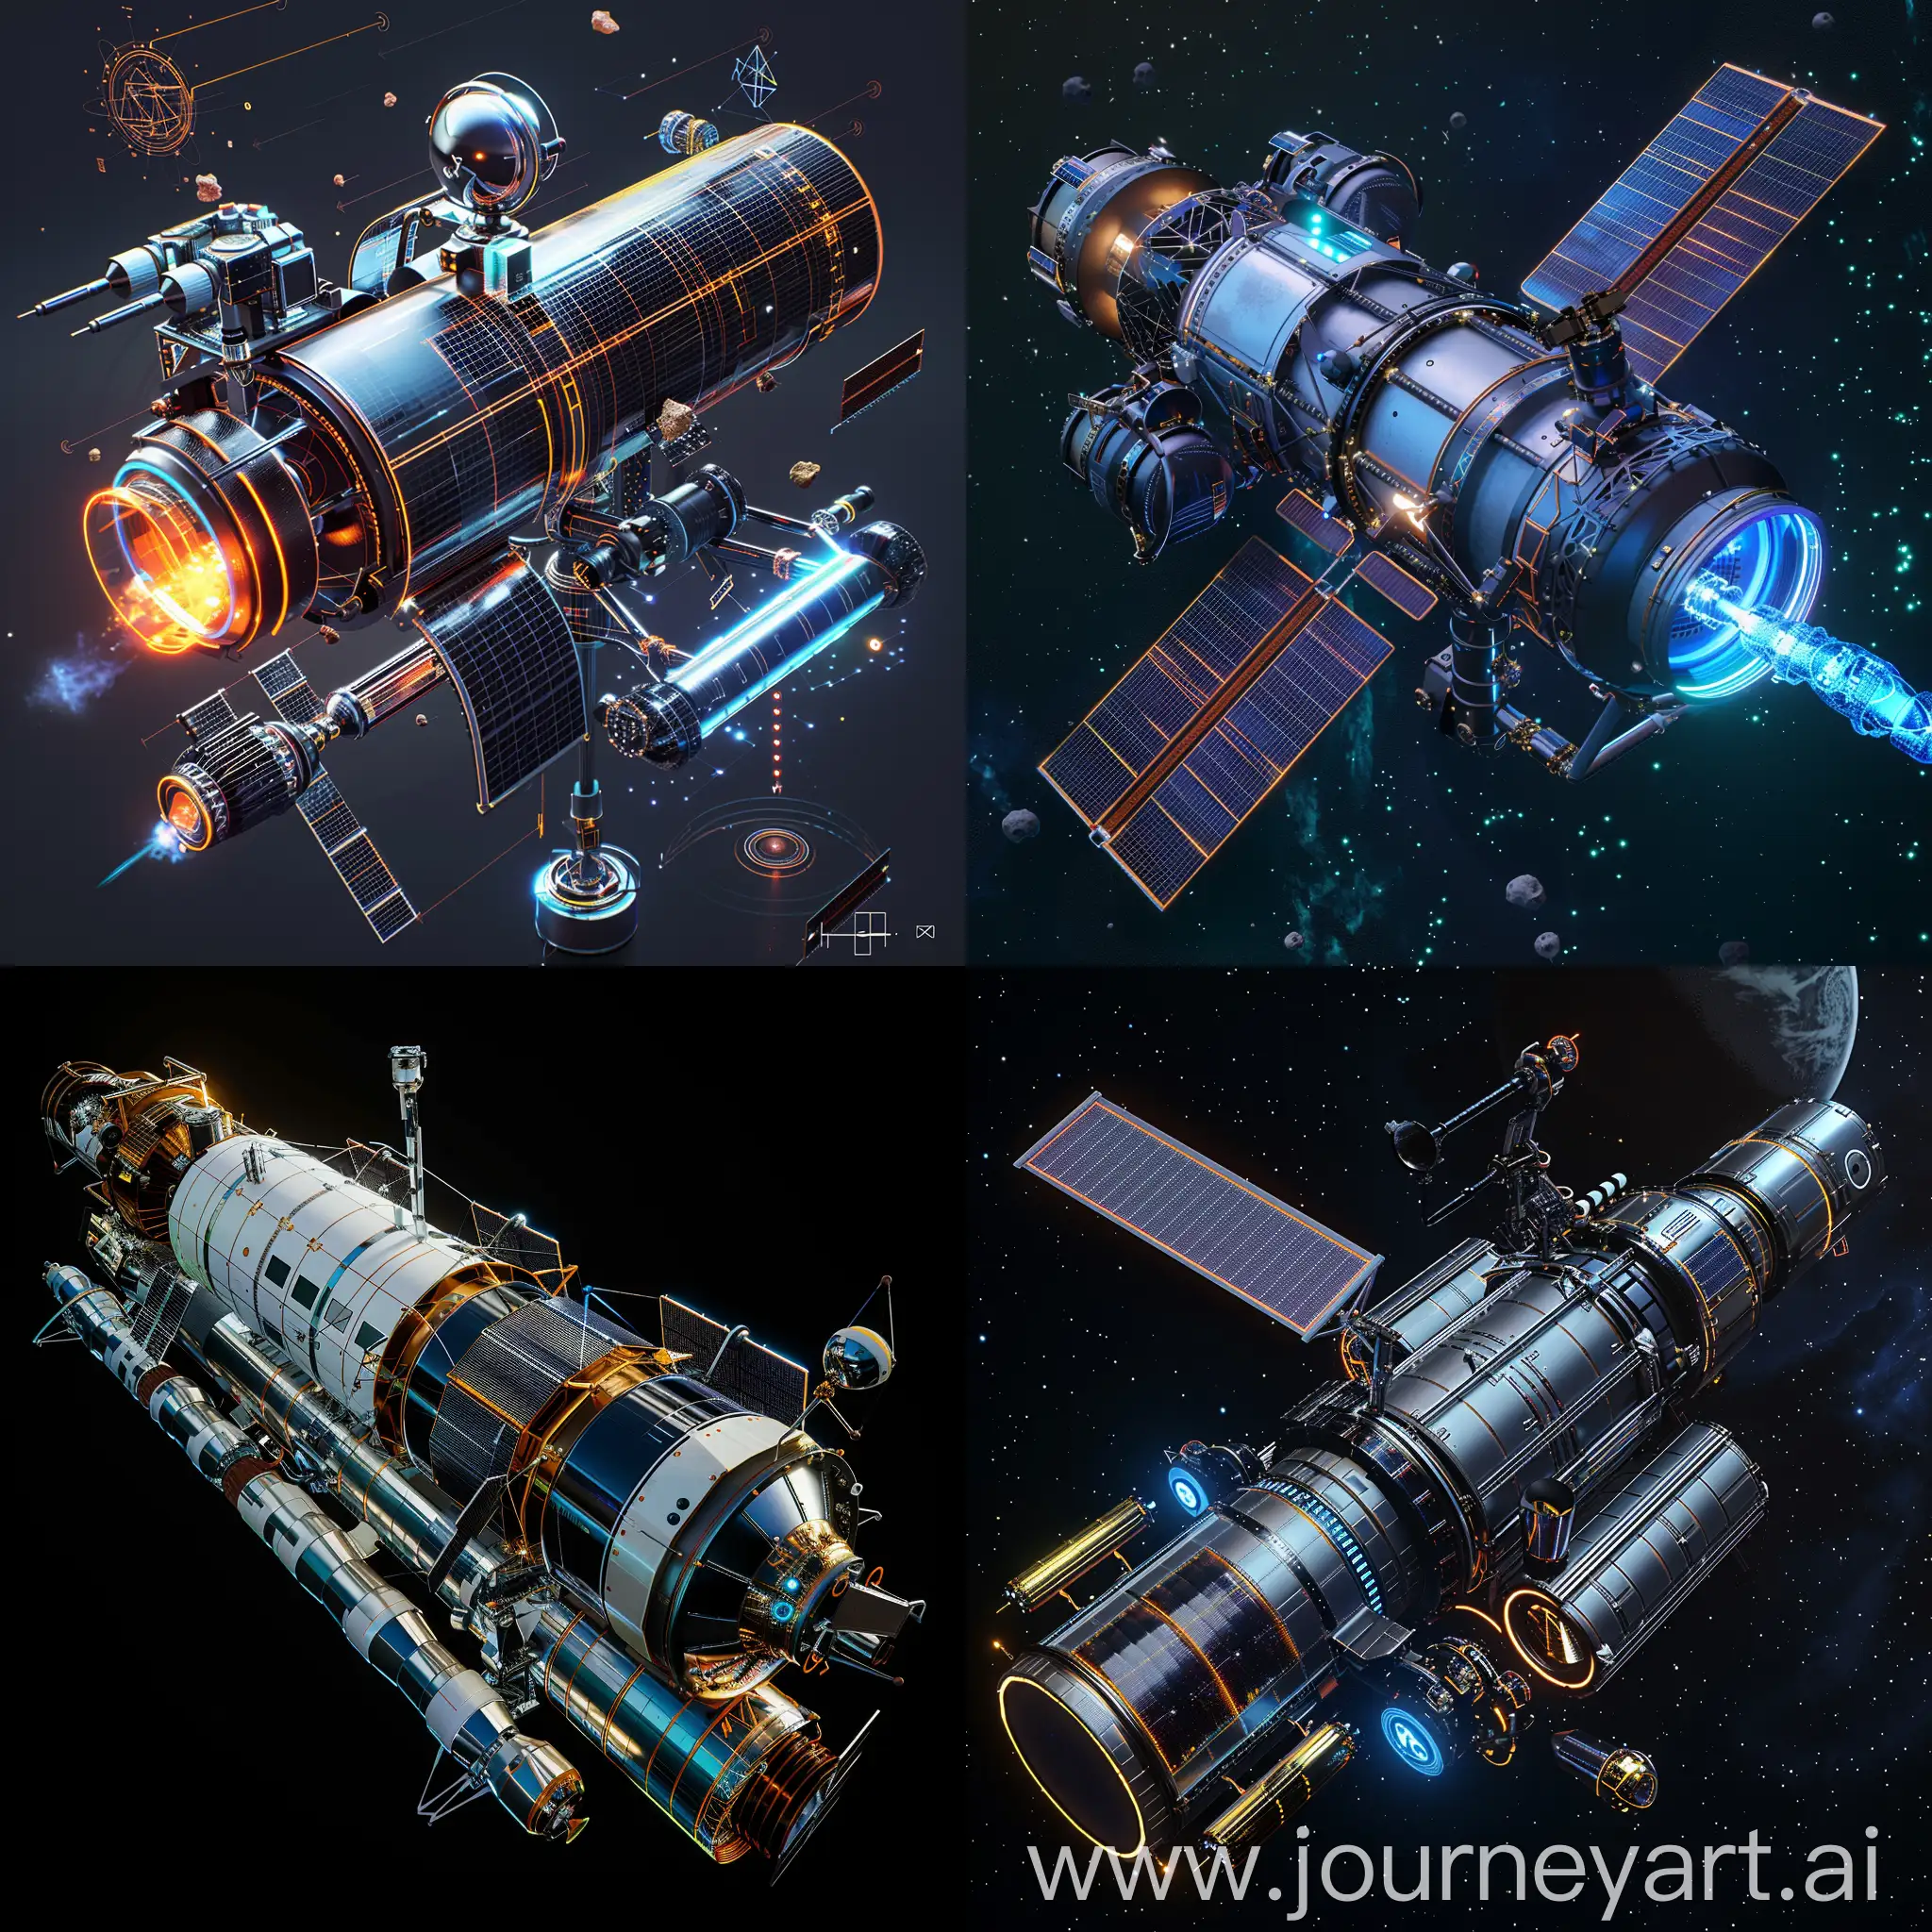 High-tech futuristic space telescope, Modular Design, AI-Driven Image Processing, Blockchain Data Storage, Quantum Sensors, 3D Printing Components, Nano-Coating Optics, Space-Grade Materials, Cloud Computing Integration, Neural Network Control Systems, Laser Communication Links, Solar Sail Technology, Self-Healing Materials, Augmented Reality Interfaces, Flexible Solar Panels, Microthrusters for Precision Maneuvering, Active Debris Removal System, Robotic Arm for Maintenance, Inflatable Structures, Electrochromic Panels, Holographic Communication Beacon, unreal engine 5 --stylize 1000